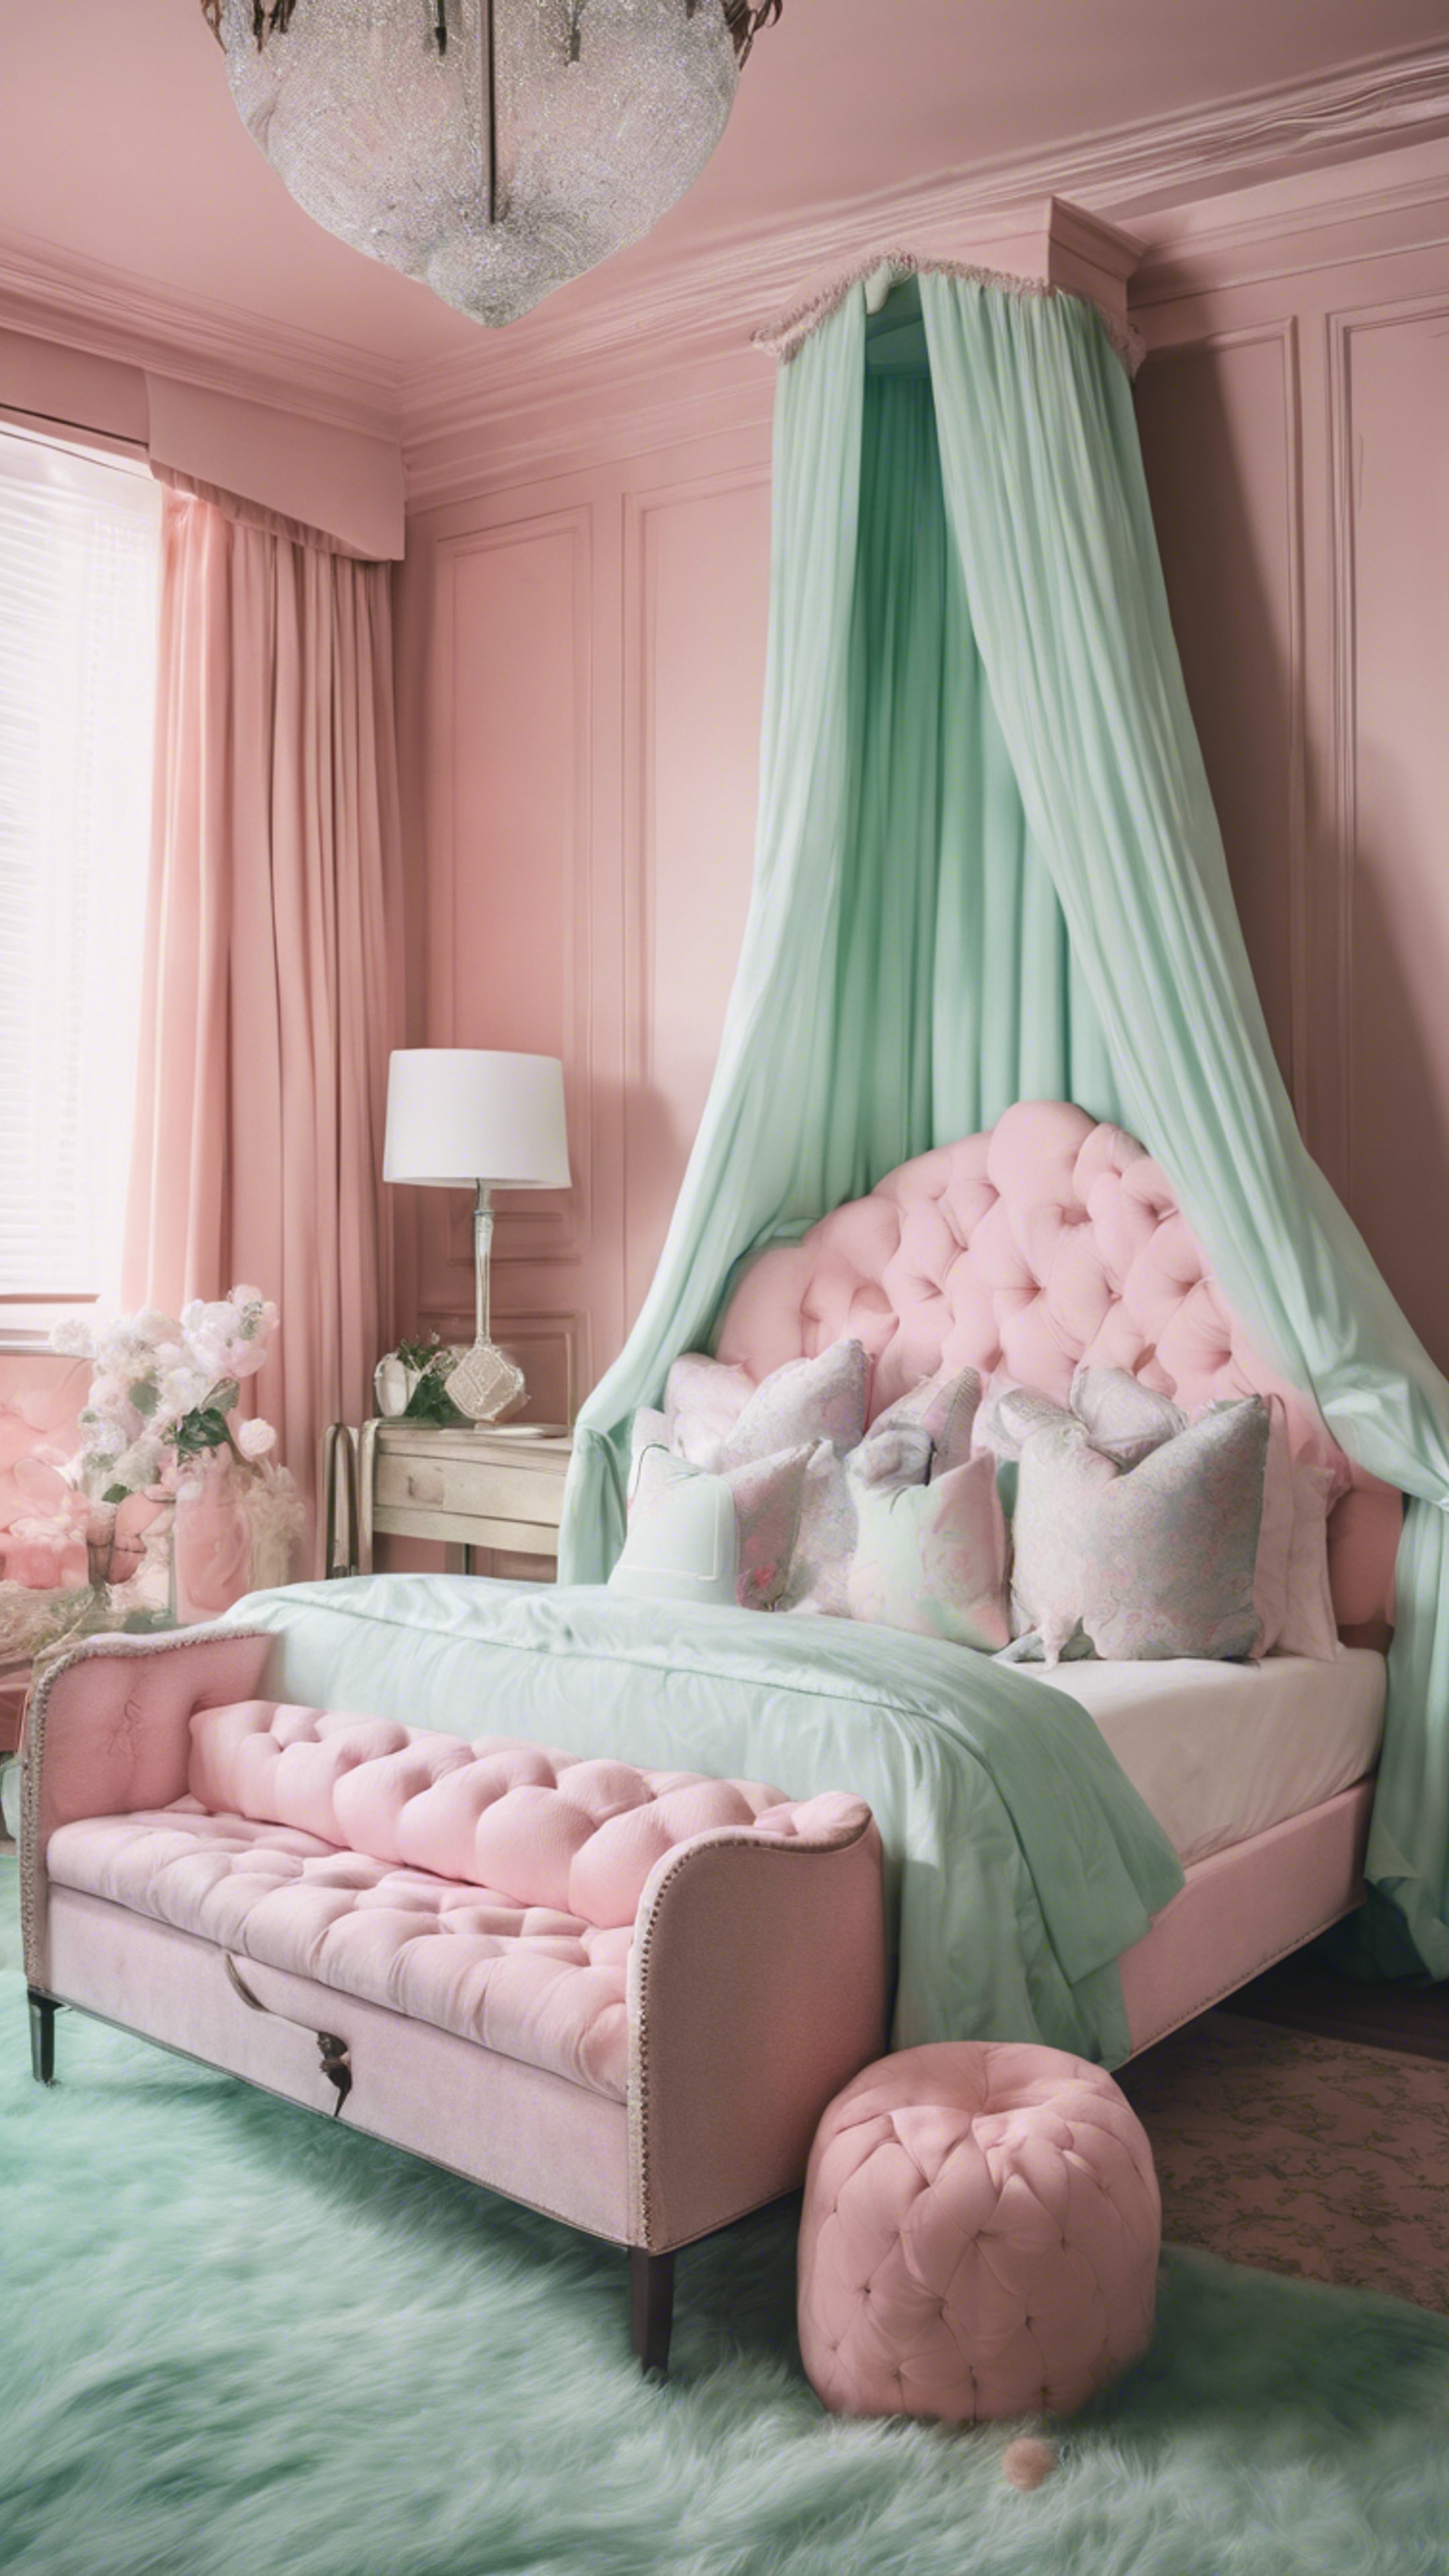 A sprawling pink and mint green preppy-style bedroom with a canopy bed and monogrammed pillows. טפט[80ed71ae36e84fc093e2]